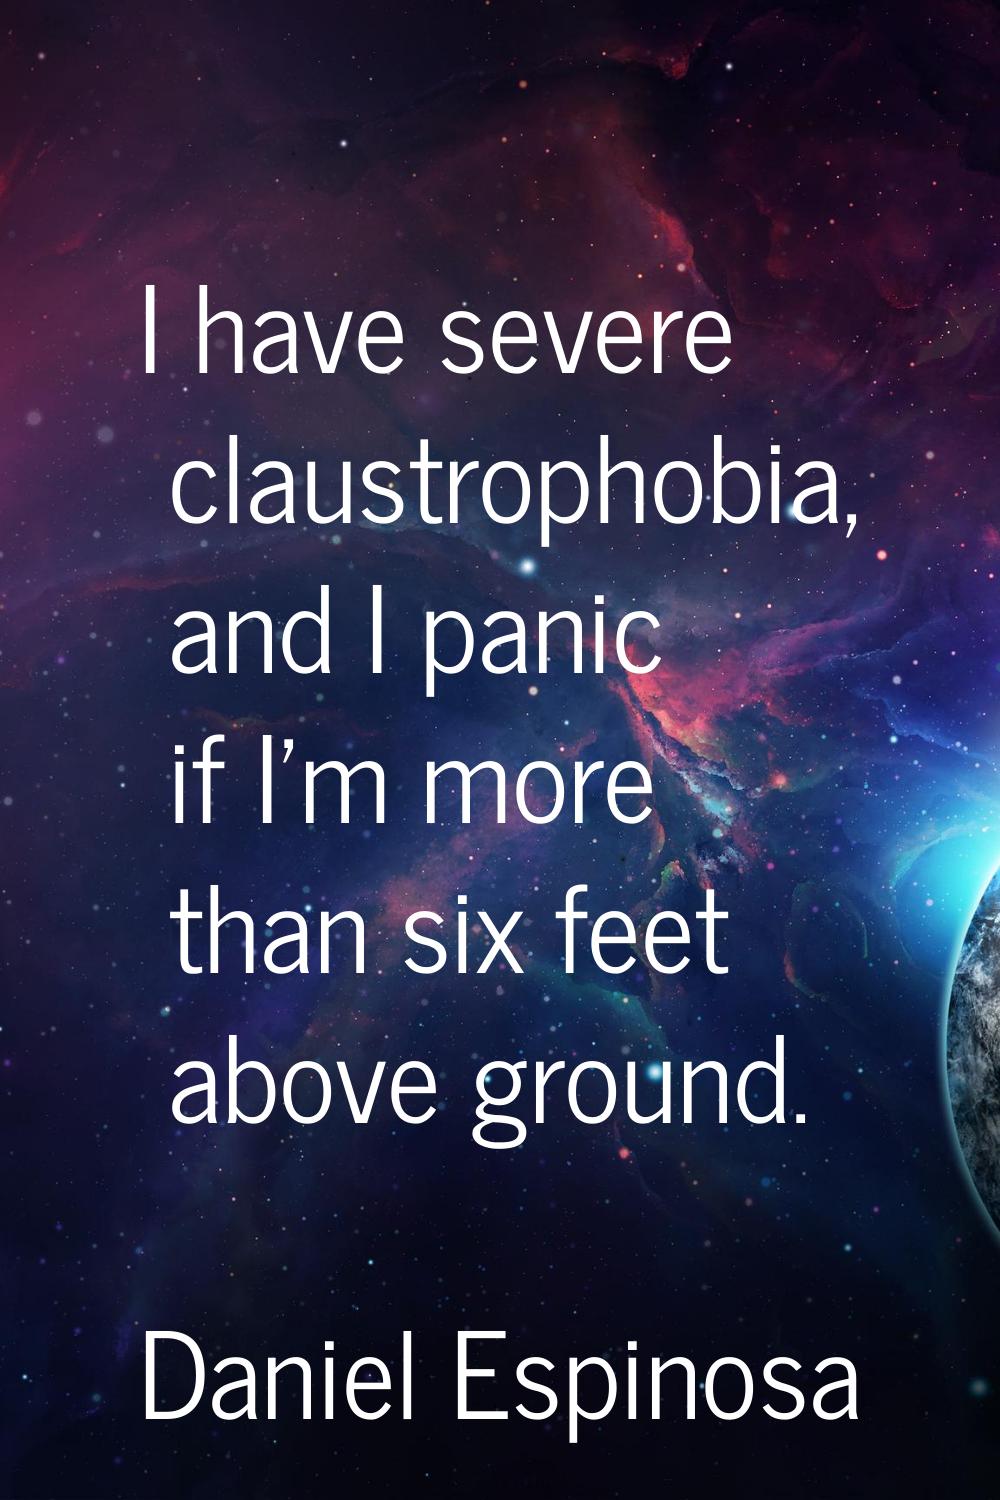 I have severe claustrophobia, and I panic if I'm more than six feet above ground.